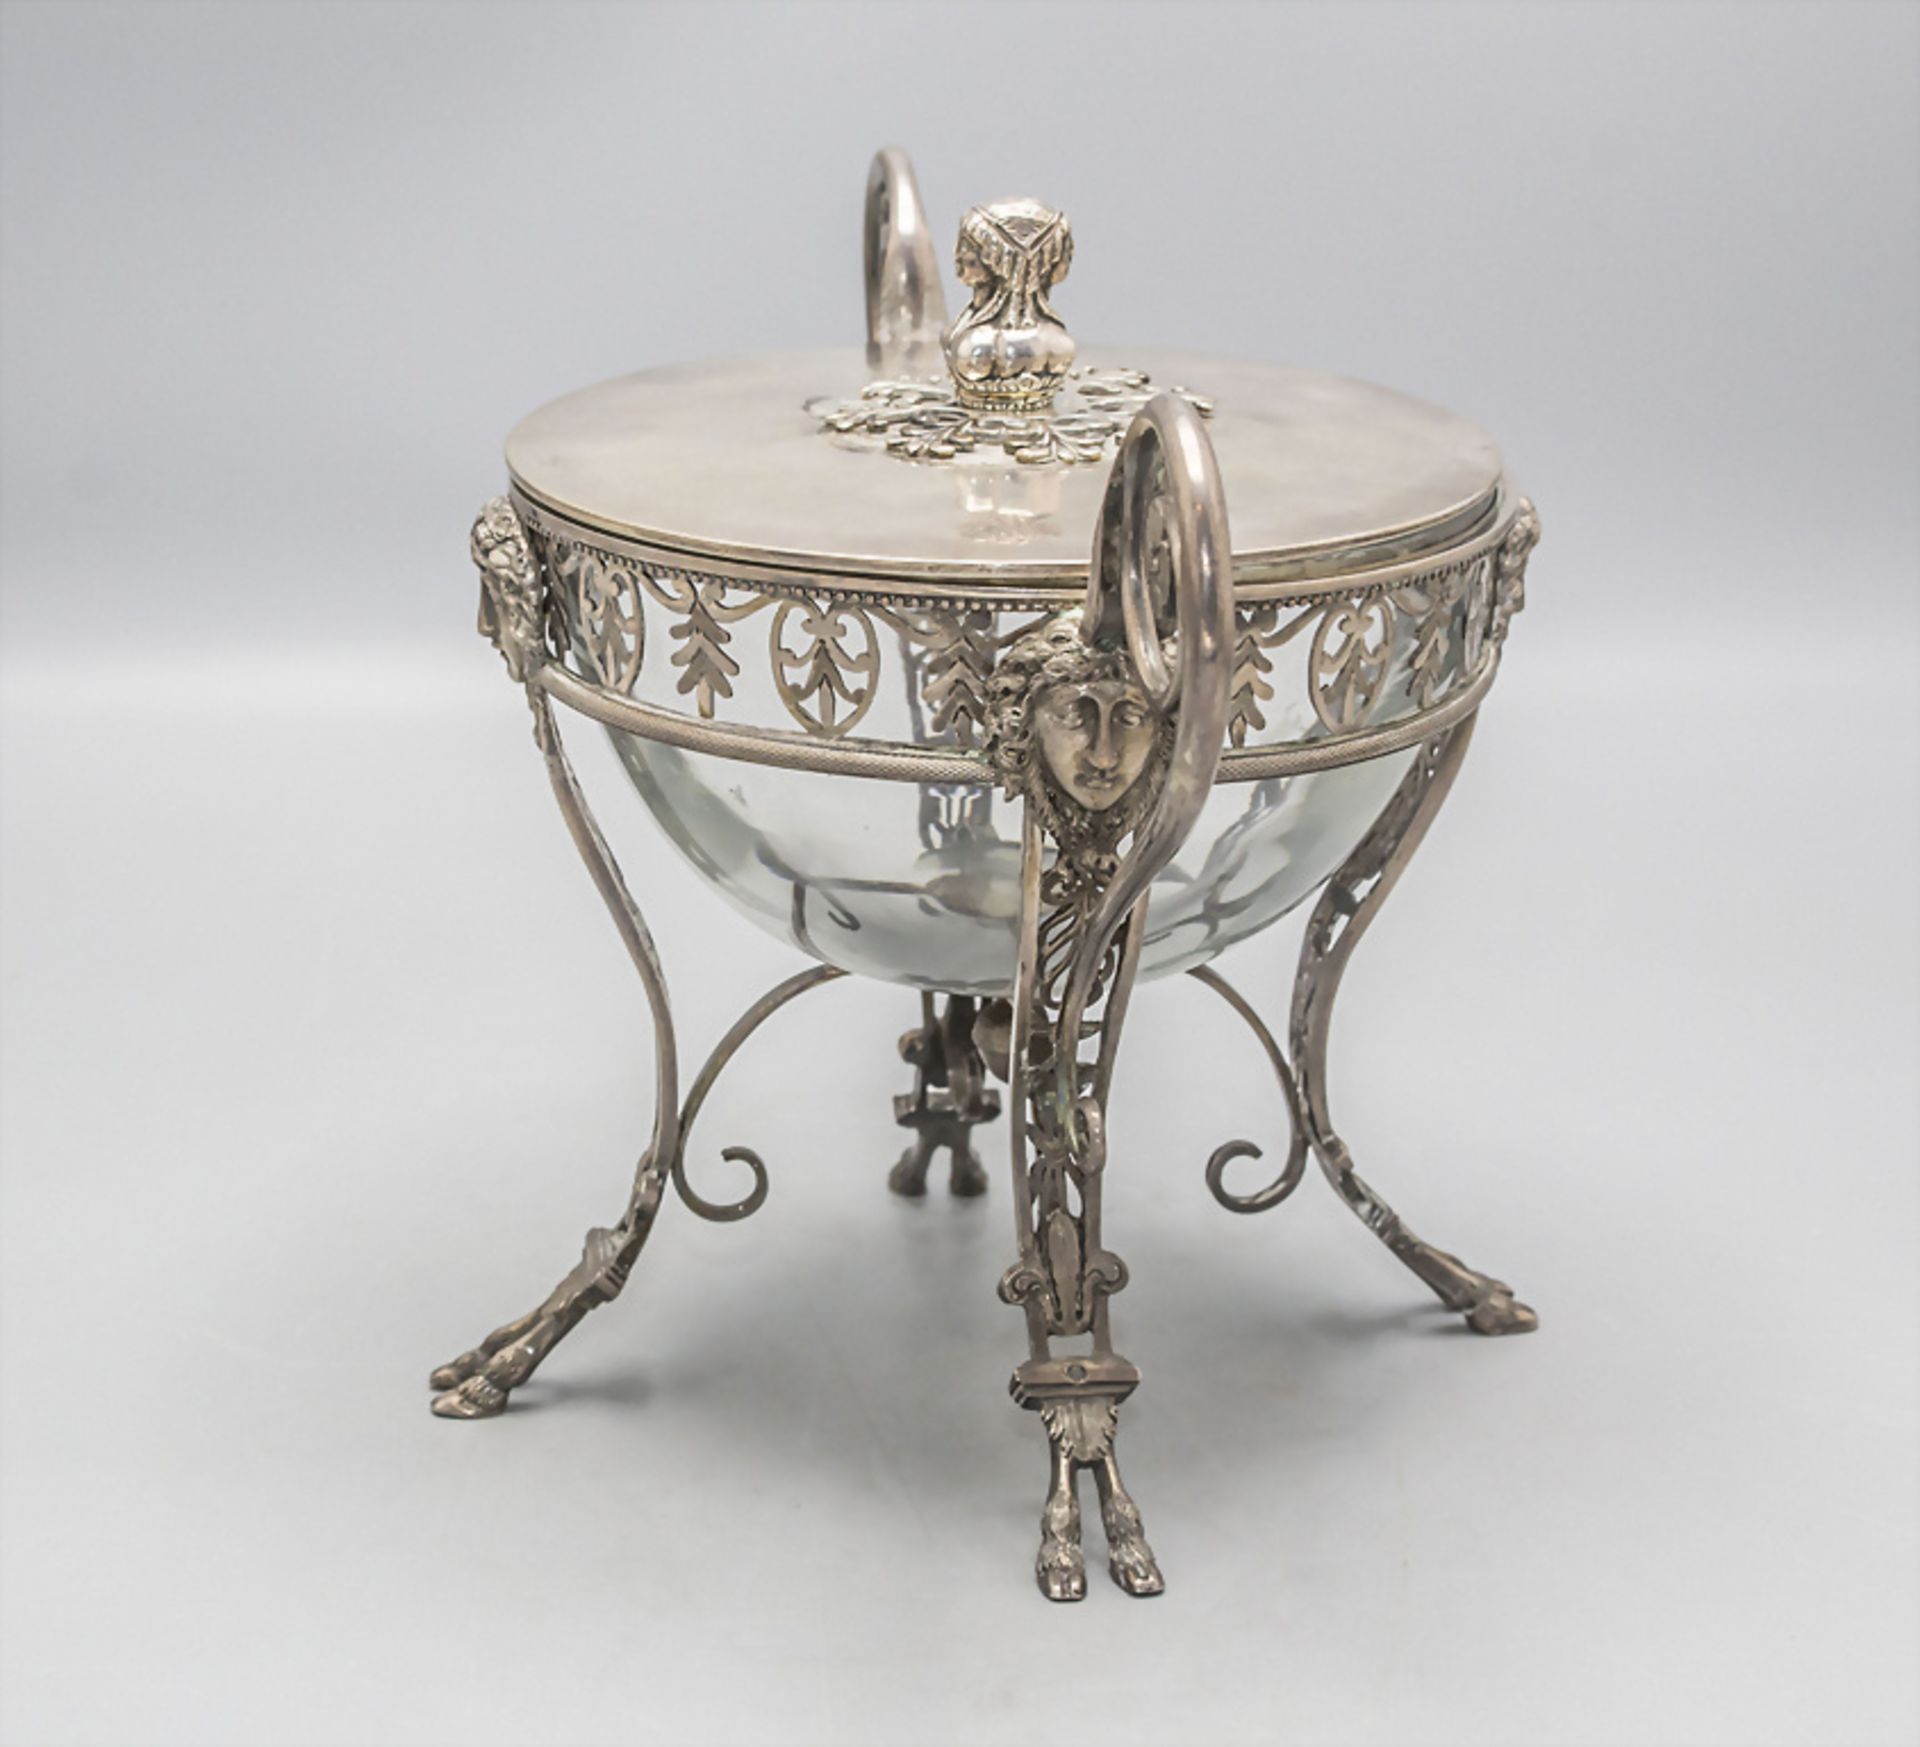 Empire Bonbonniere / An Empire silver candy bowl with lid, Paris, 1798-1809 - Image 2 of 6